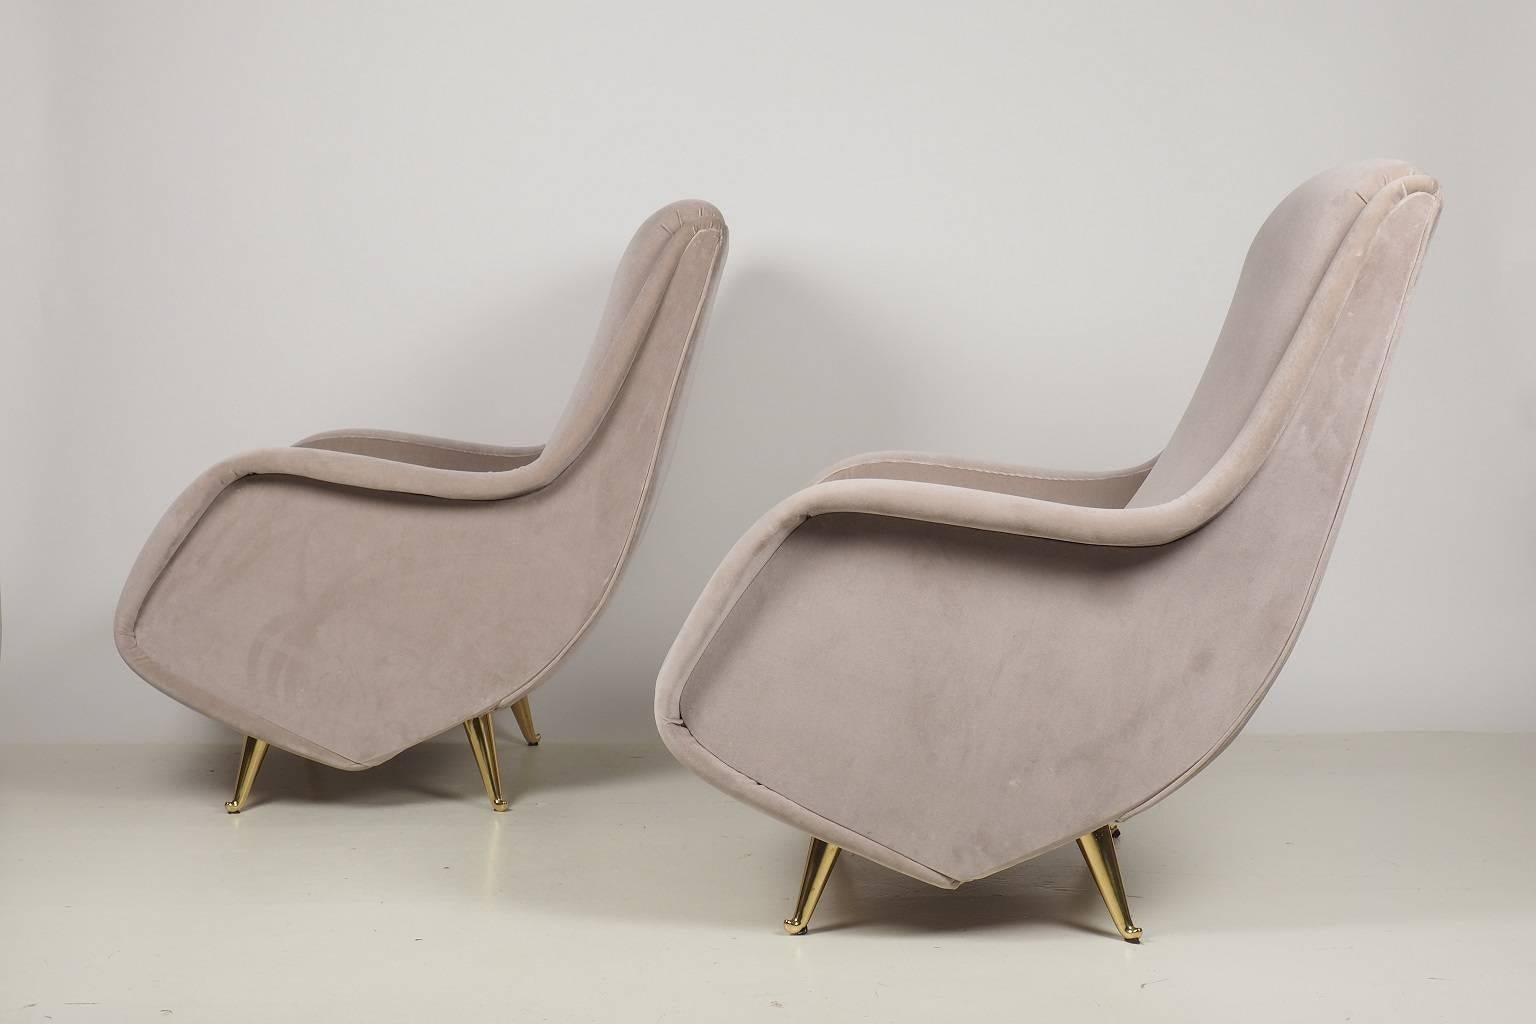 Velvet Fine Italian Lounge Chairs Manufactured by ISA,  Milano, Italy 1950's